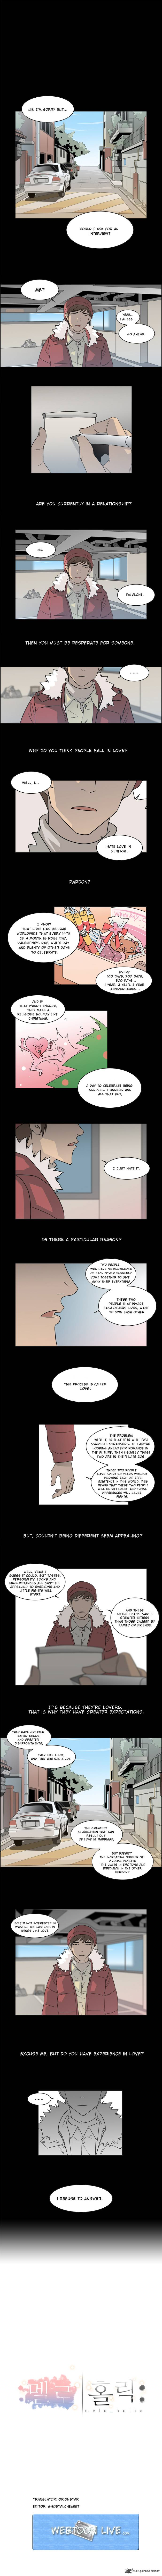 Melo Holic Chapter 1 Page 1